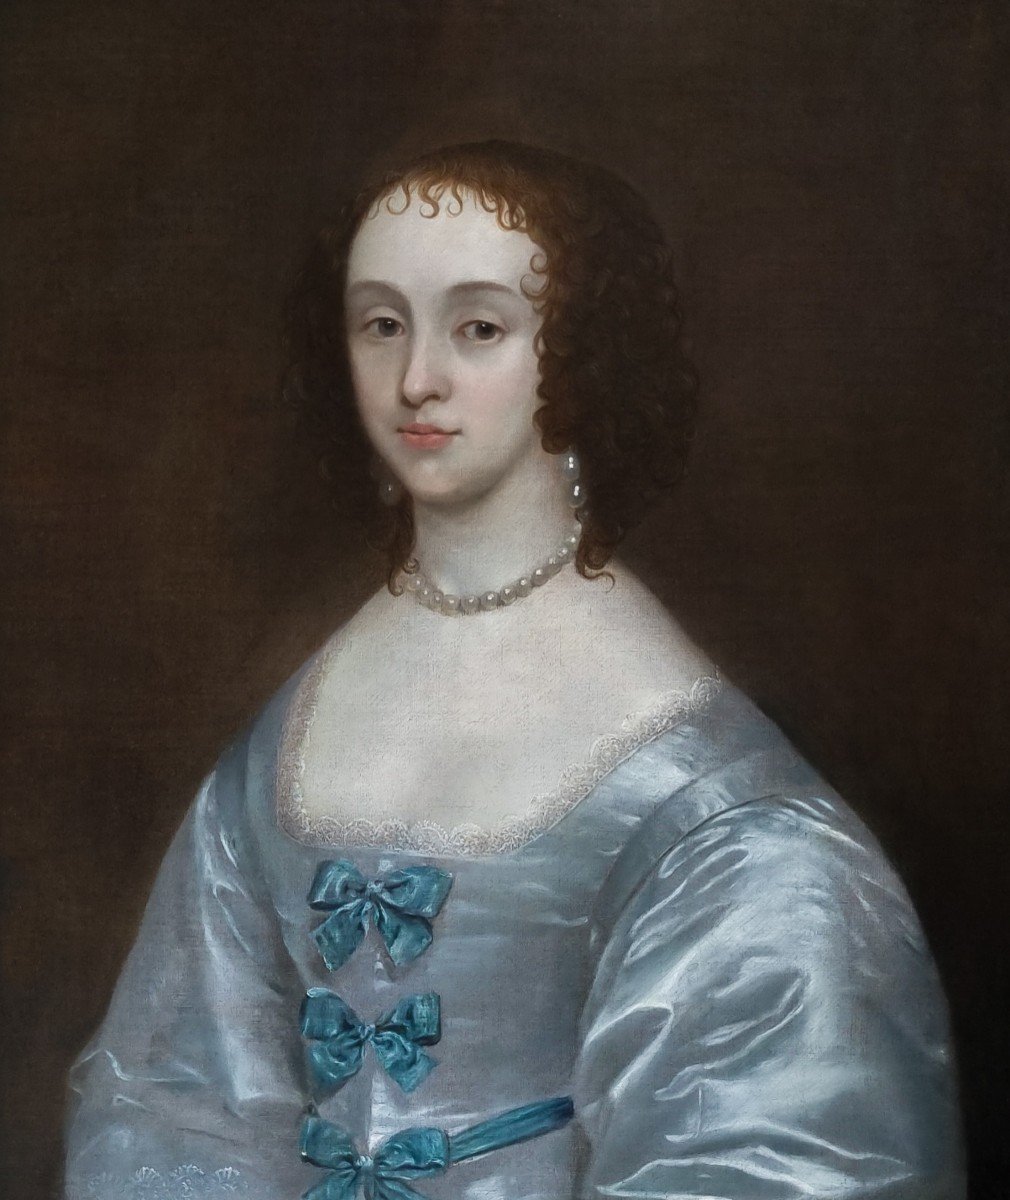 Portrait Of A Lady, Katherine St Aubyn Godolphin C.1637, Antique Painting Oil On Canvas-photo-3